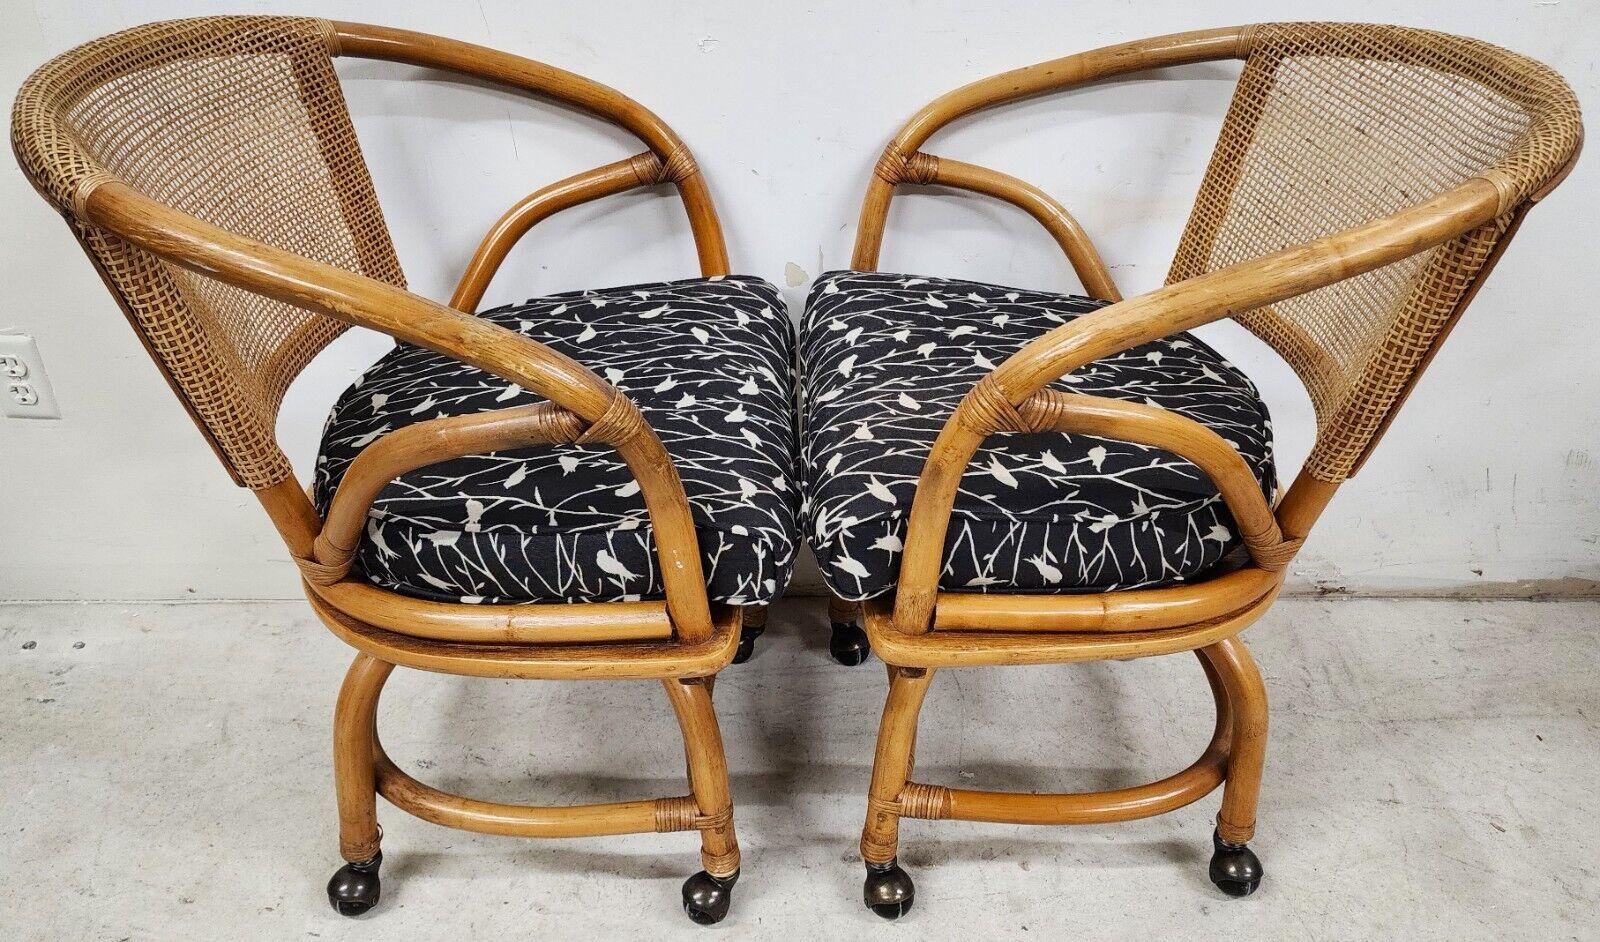 Offering One Of Our Recent Palm Beach Estate Fine Furniture Acquisitions Of A 
Set of 4 1970s Bamboo Cane Back & Rattan Dining or Game Chairs with Full 360 Degree Swivel & Rolling by FICKS REED.
Fabric on zippered cushions is Black with White